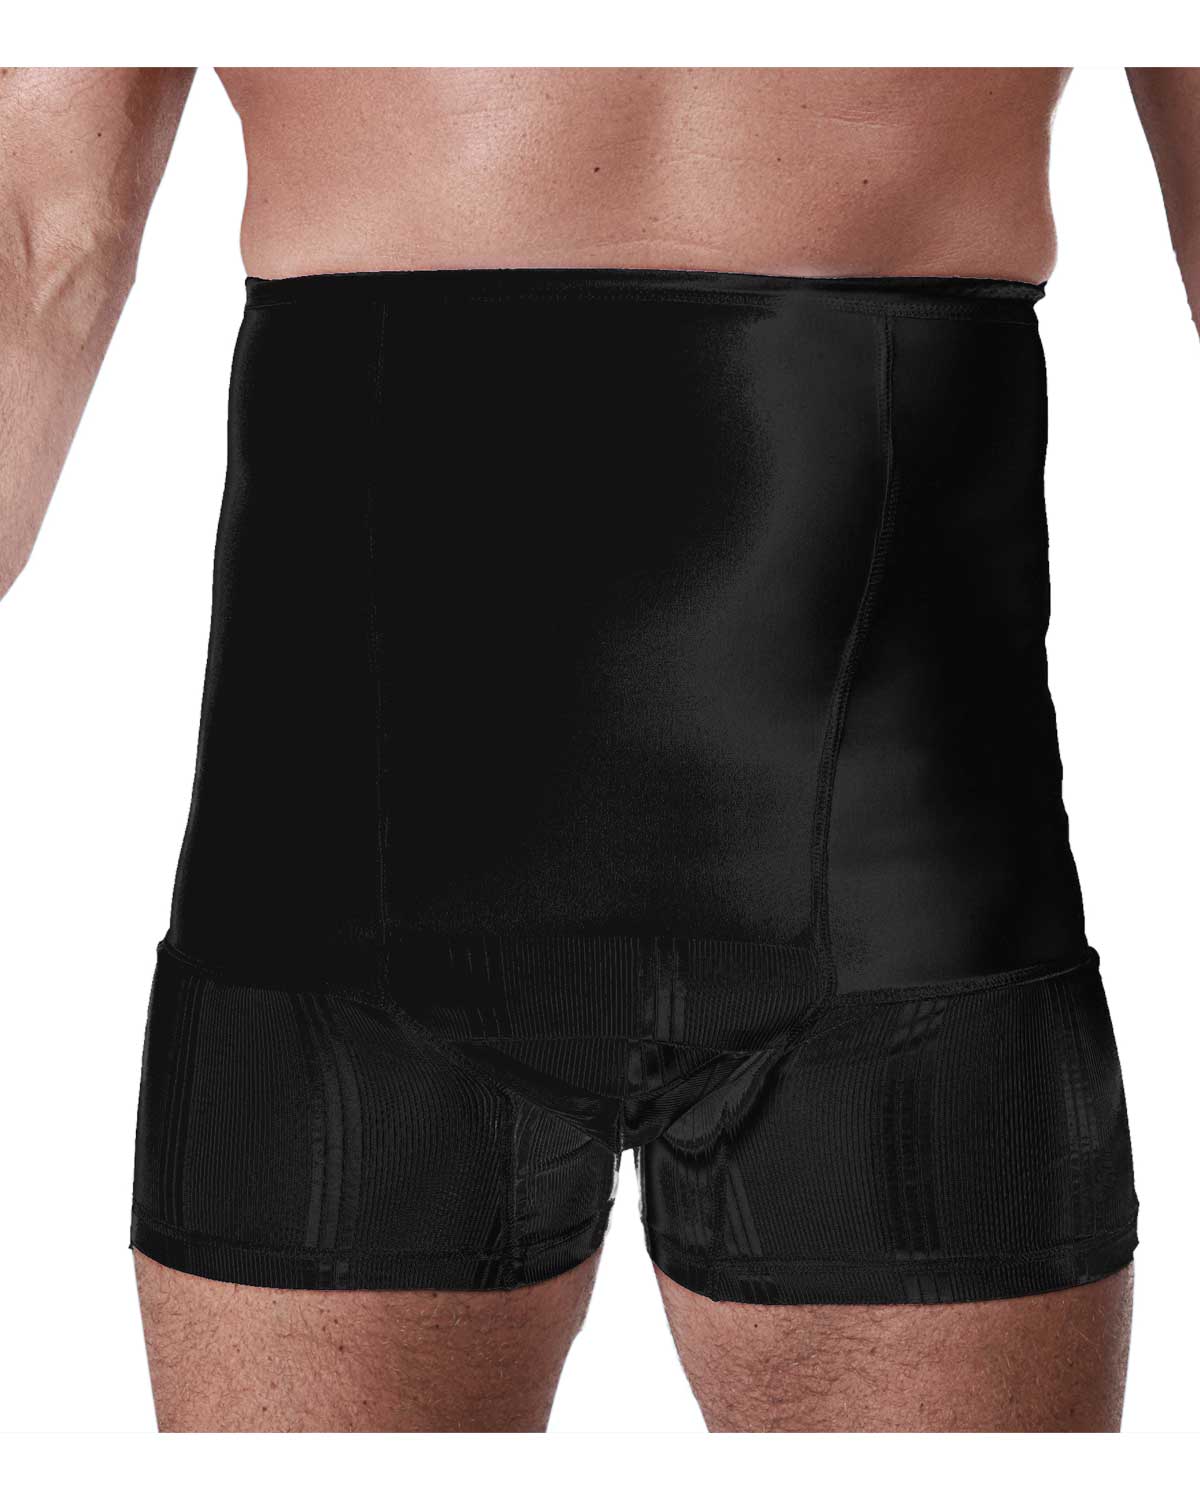 CUI Mens Hernia Low Waist Support Girdle With Legs - 1 each, SMALL, BLACK